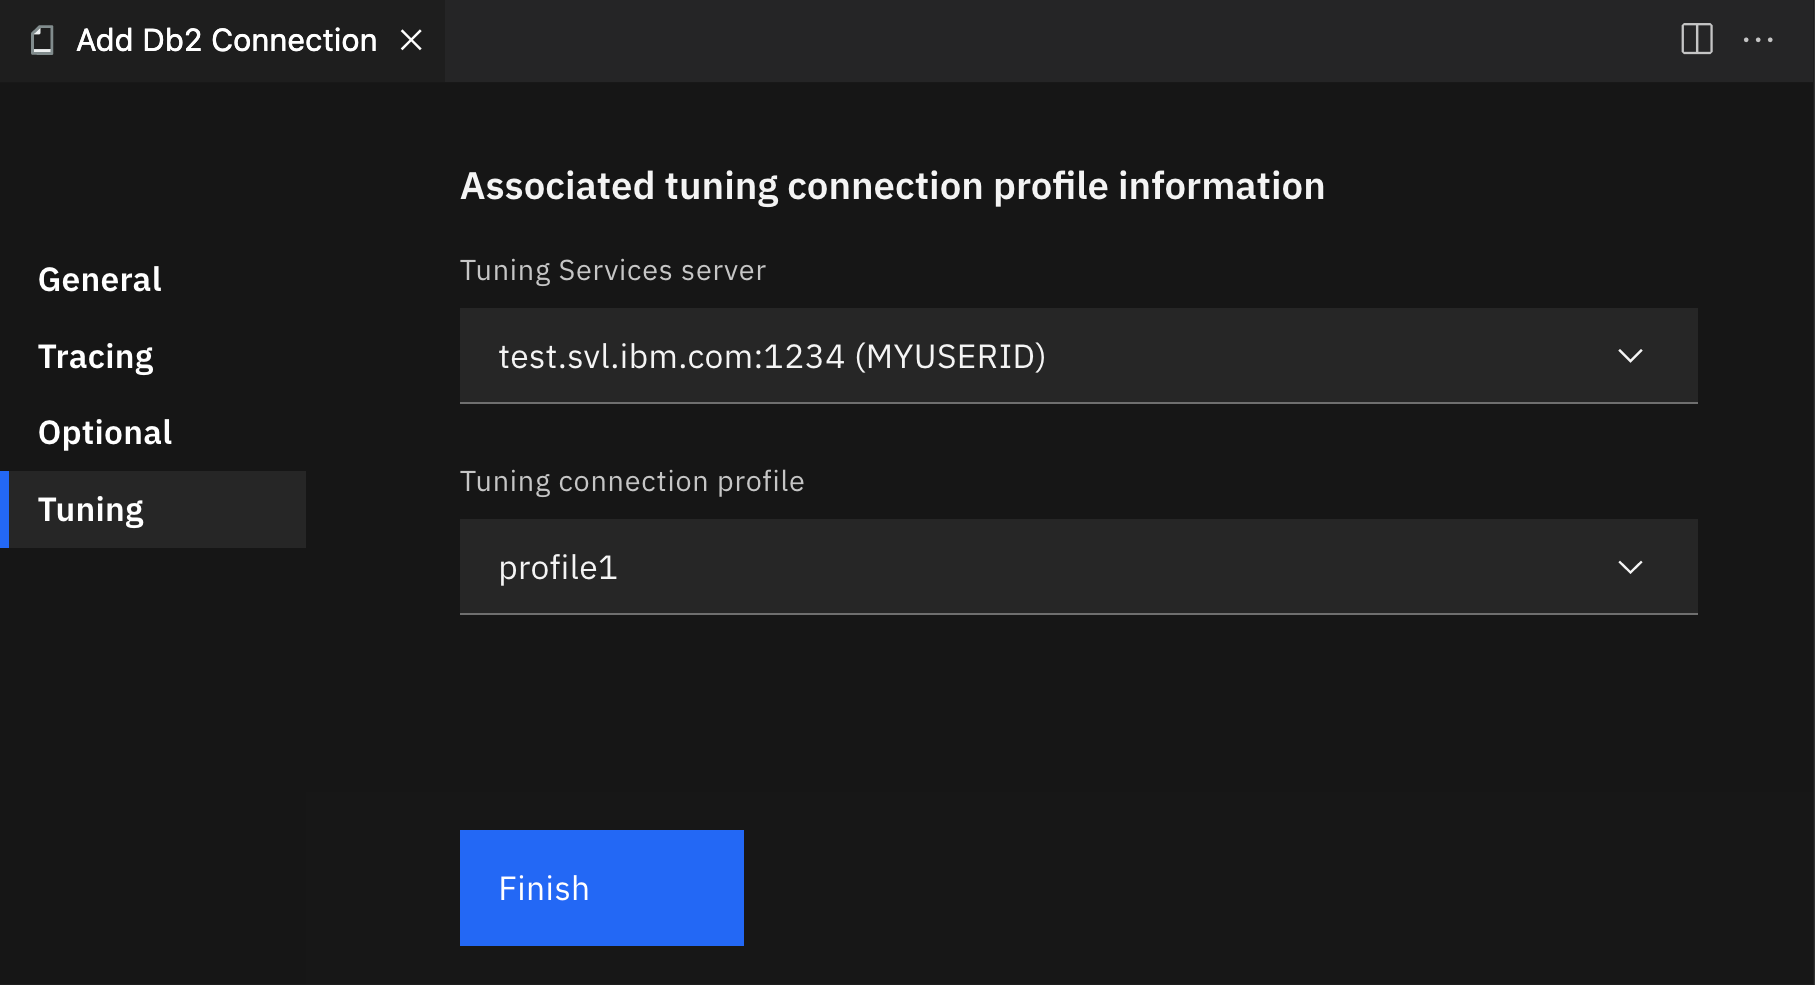 Associating a tuning connection profile